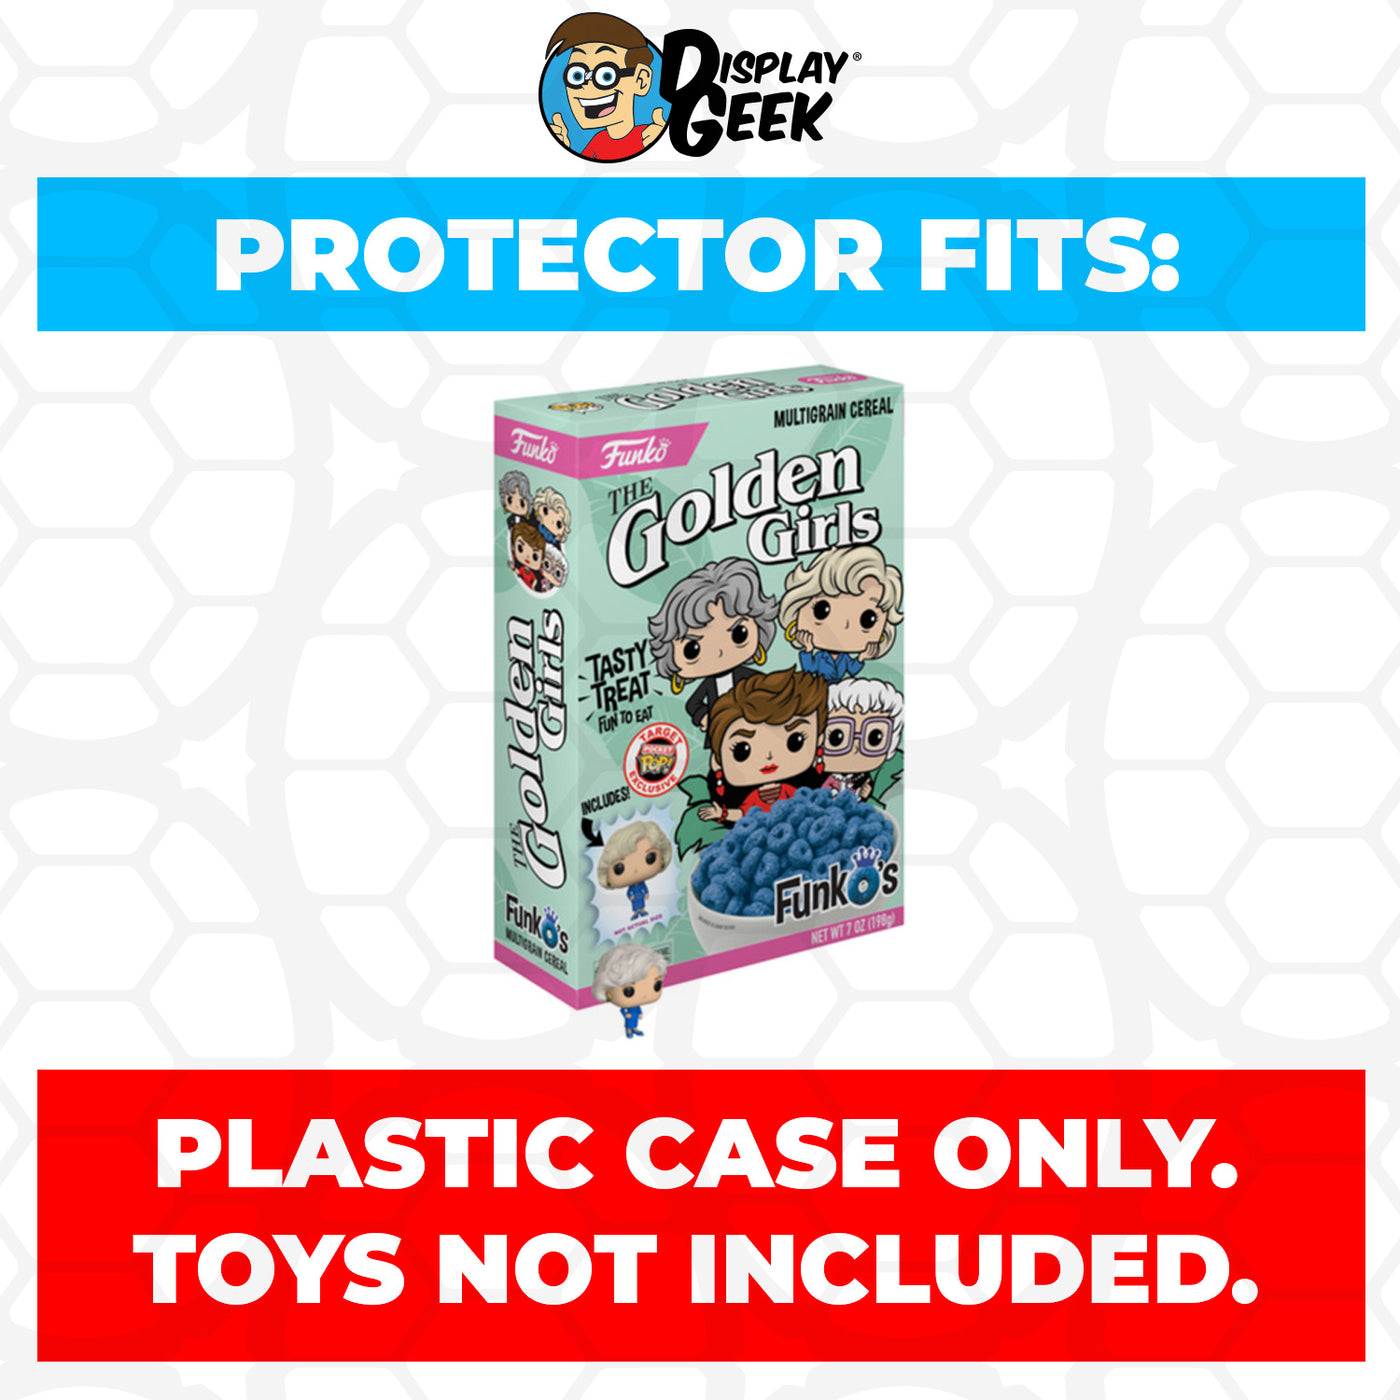 Pop Protector for The Golden Girls FunkO's Cereal Box on The Protector Guide App by Display Geek